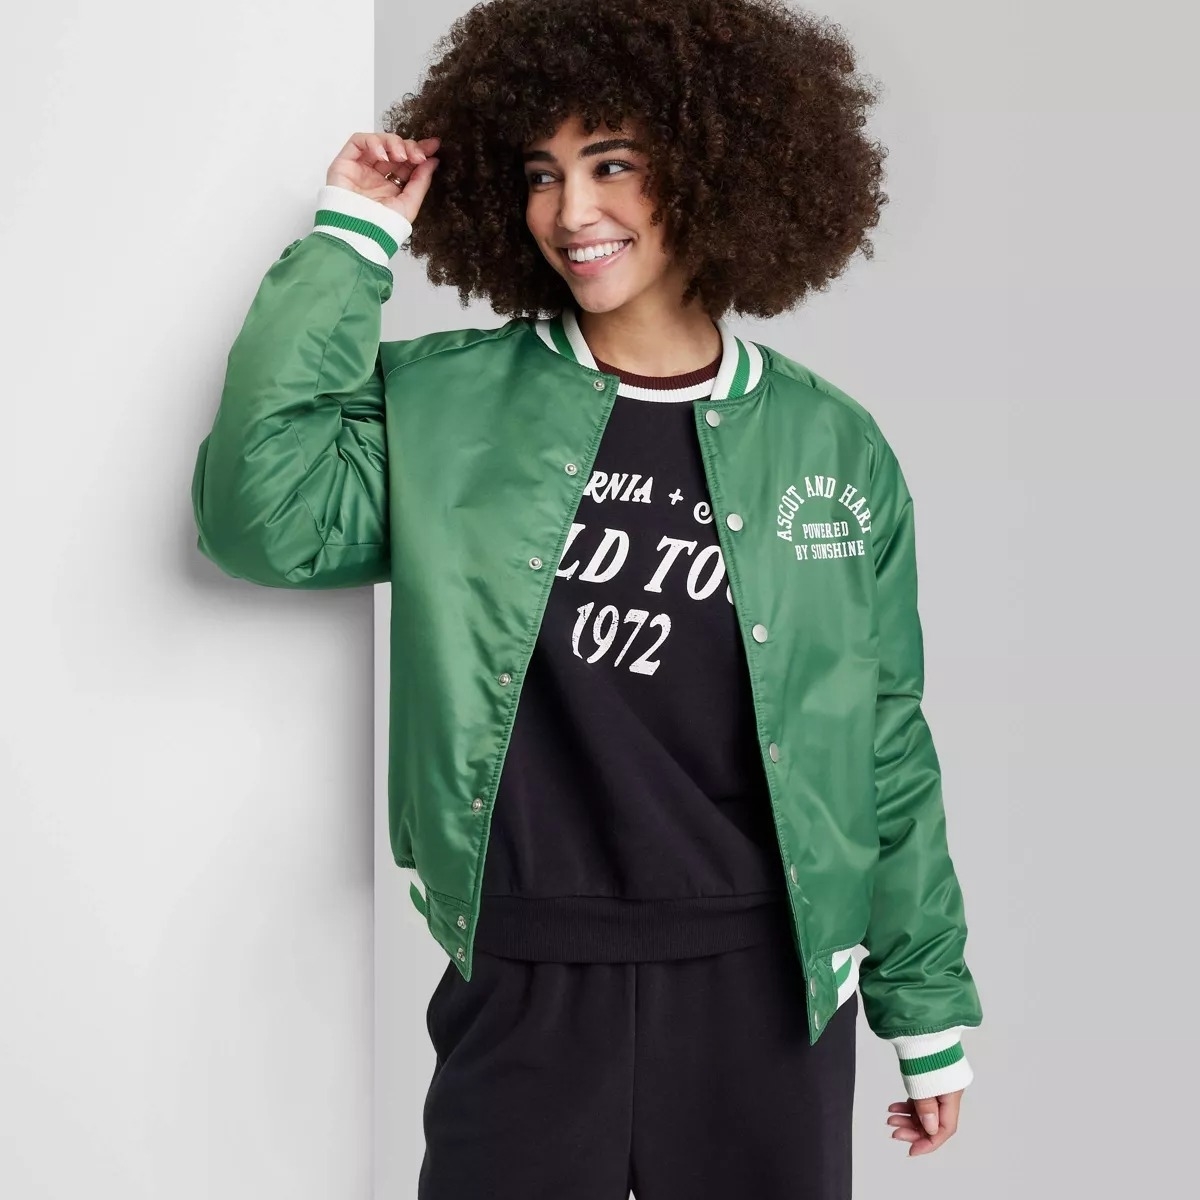 Person in a green bomber jacket with green and white striping at wrists and neck